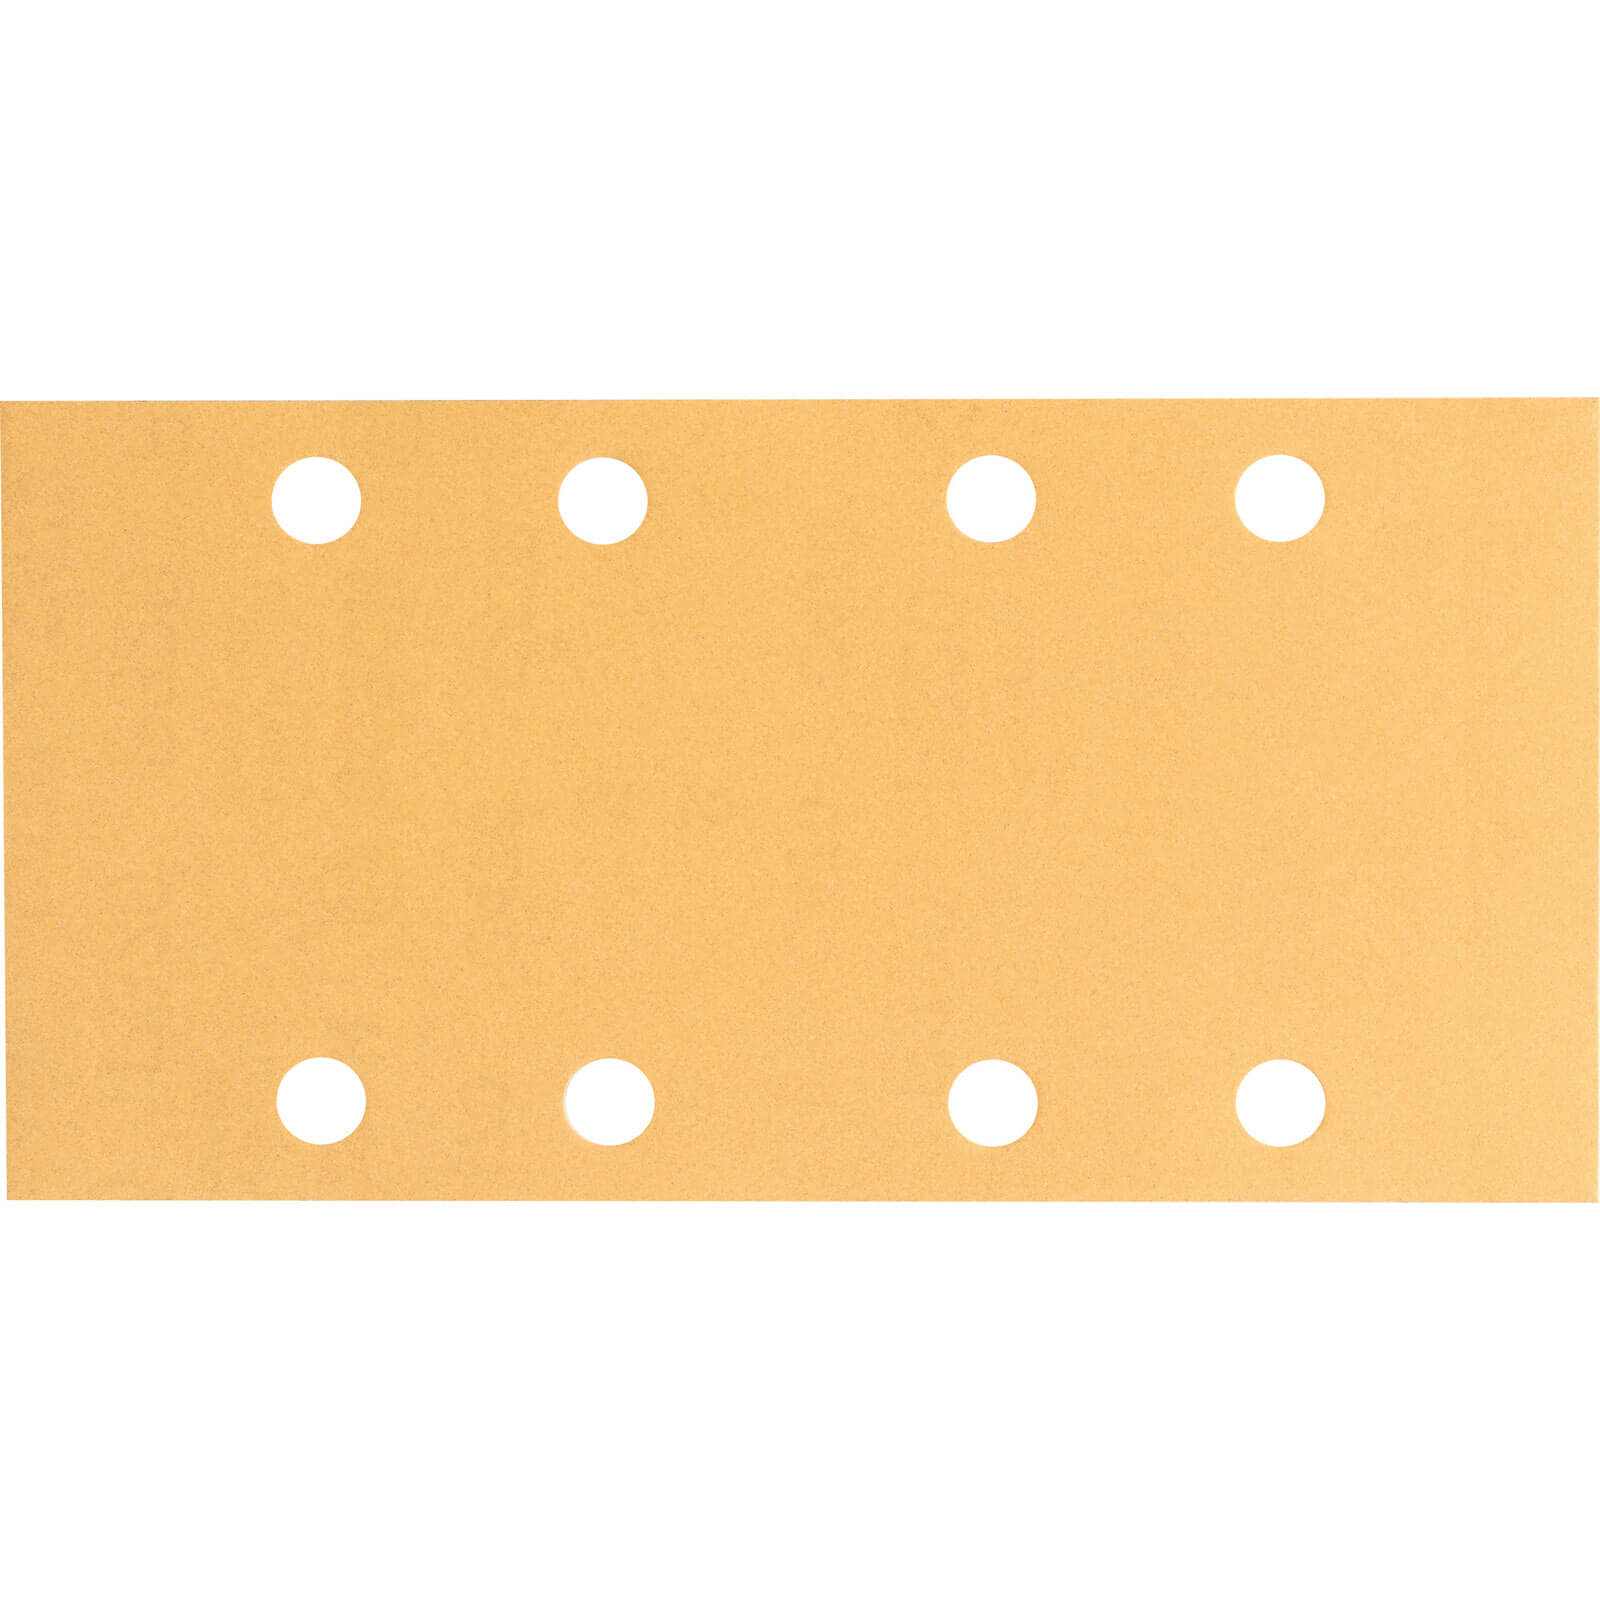 Image of Bosch Punched Hook and Loop Sanding Sheets 93mm x 186mm 400g Pack of 10